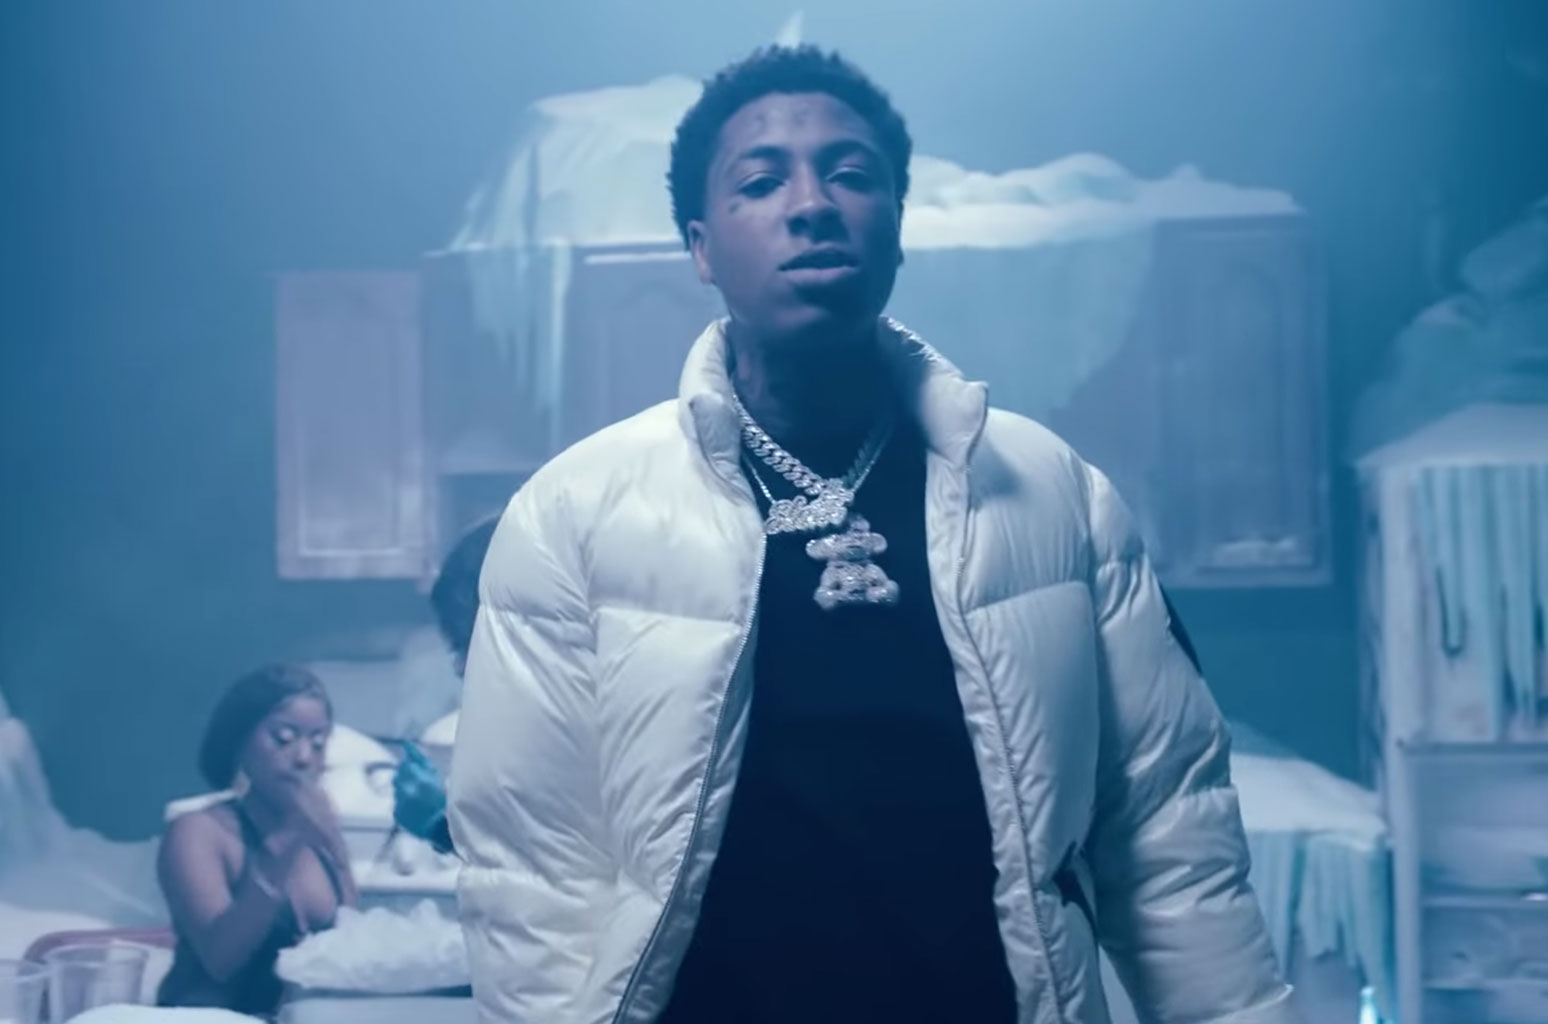 YoungBoy Never Broke Again Ices Out the Trap House in Frigid 'Make No Sense' Video